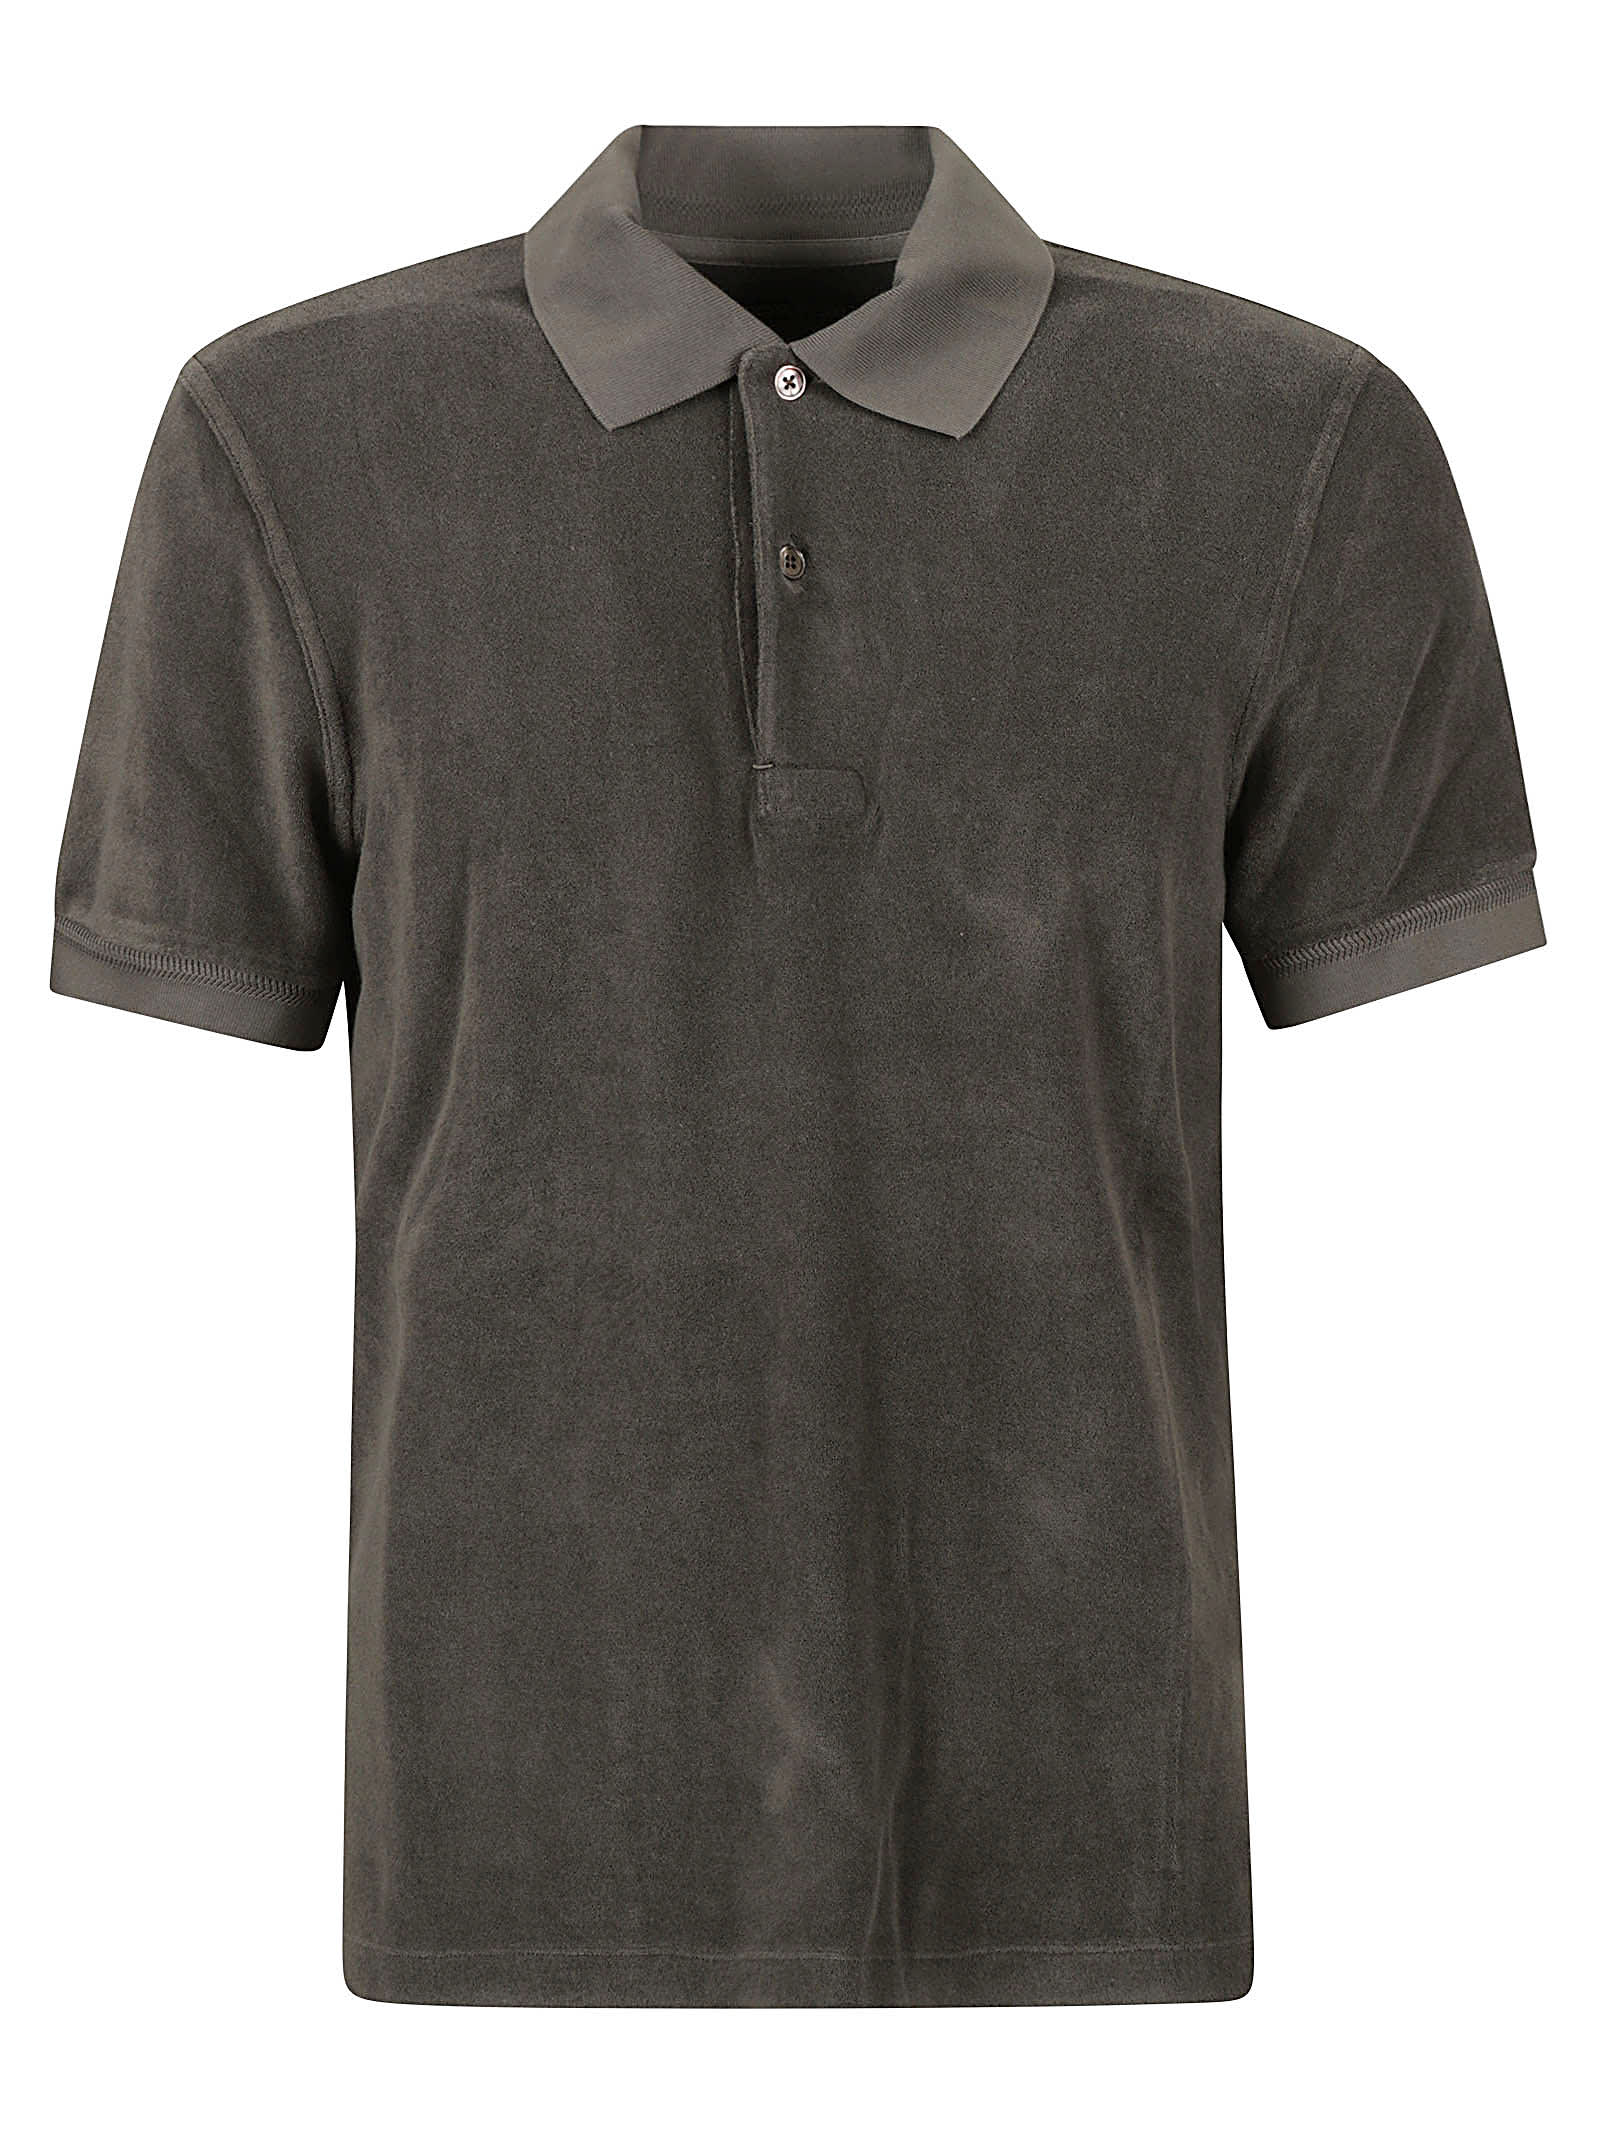 TOM FORD VINTAGE EFFECT RIBBED POLO SHIRT